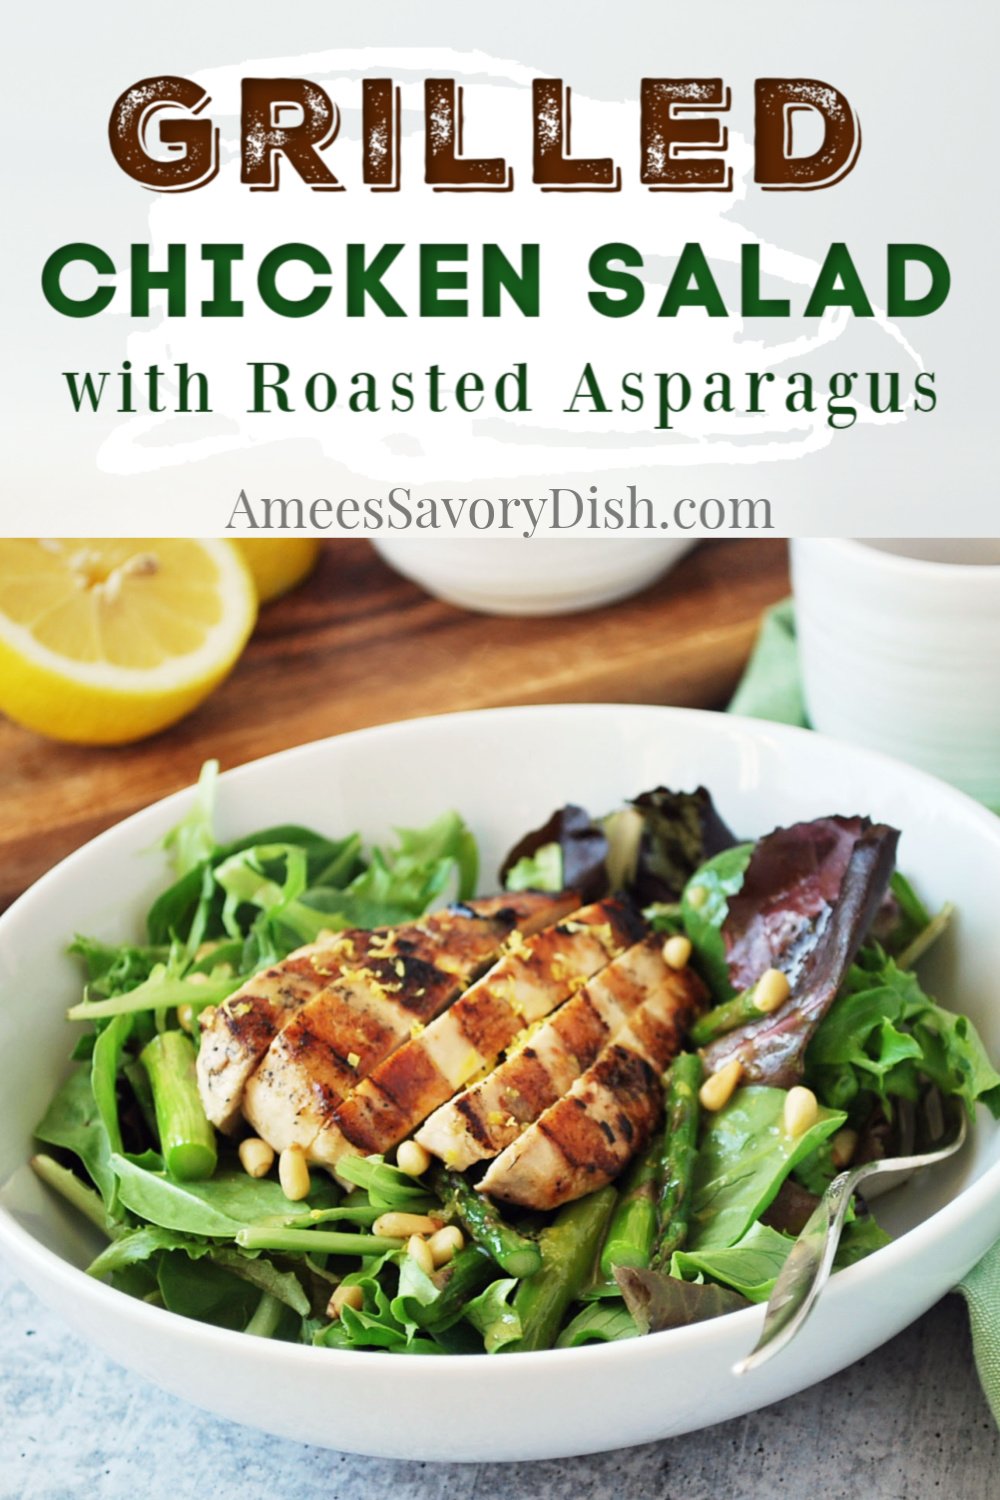 An easy and flavorful grilled chicken salad recipe made with roasted fresh asparagus, toasted pine nuts, and a delicious lemon balsamic vinaigrette dressing.  It's the perfect weeknight recipe to use up leftover grilled chicken! #grilledchickensalad #saladrecipes #salads #entreesalads via @Ameessavorydish